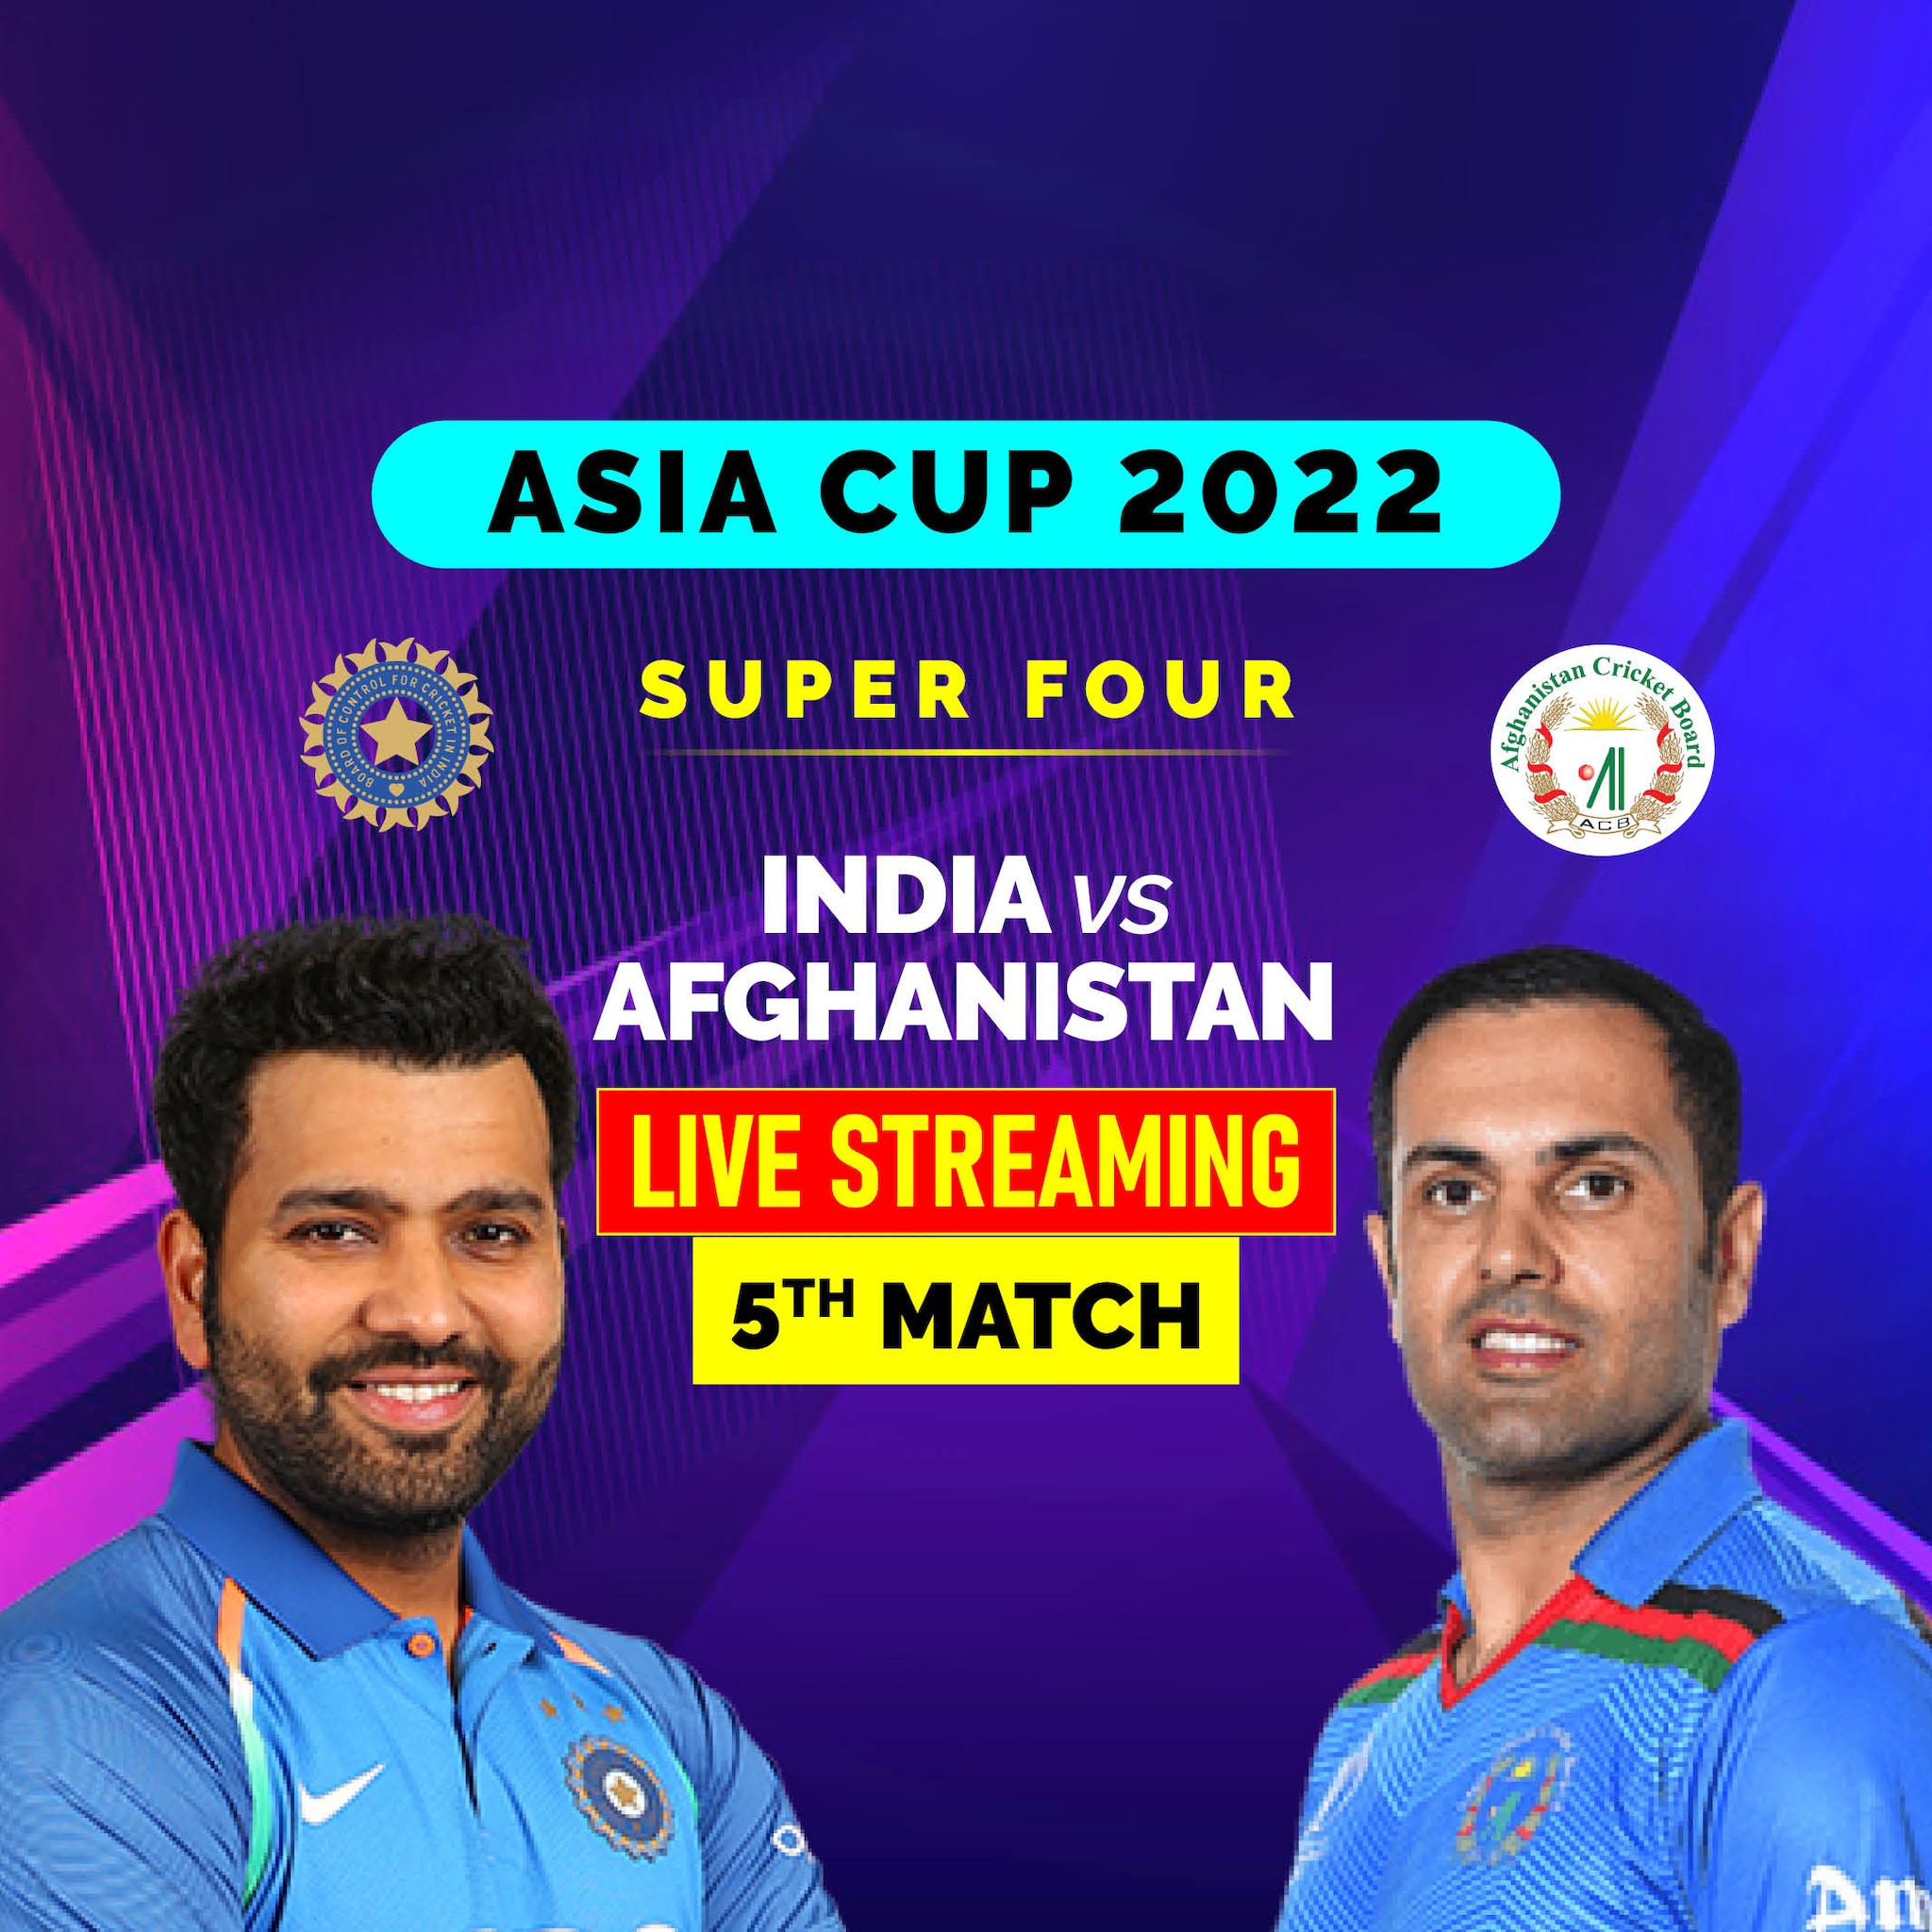 Asia Cup 2022 Super 4 Match 5 Afghanistan vs India Sports/Cricket